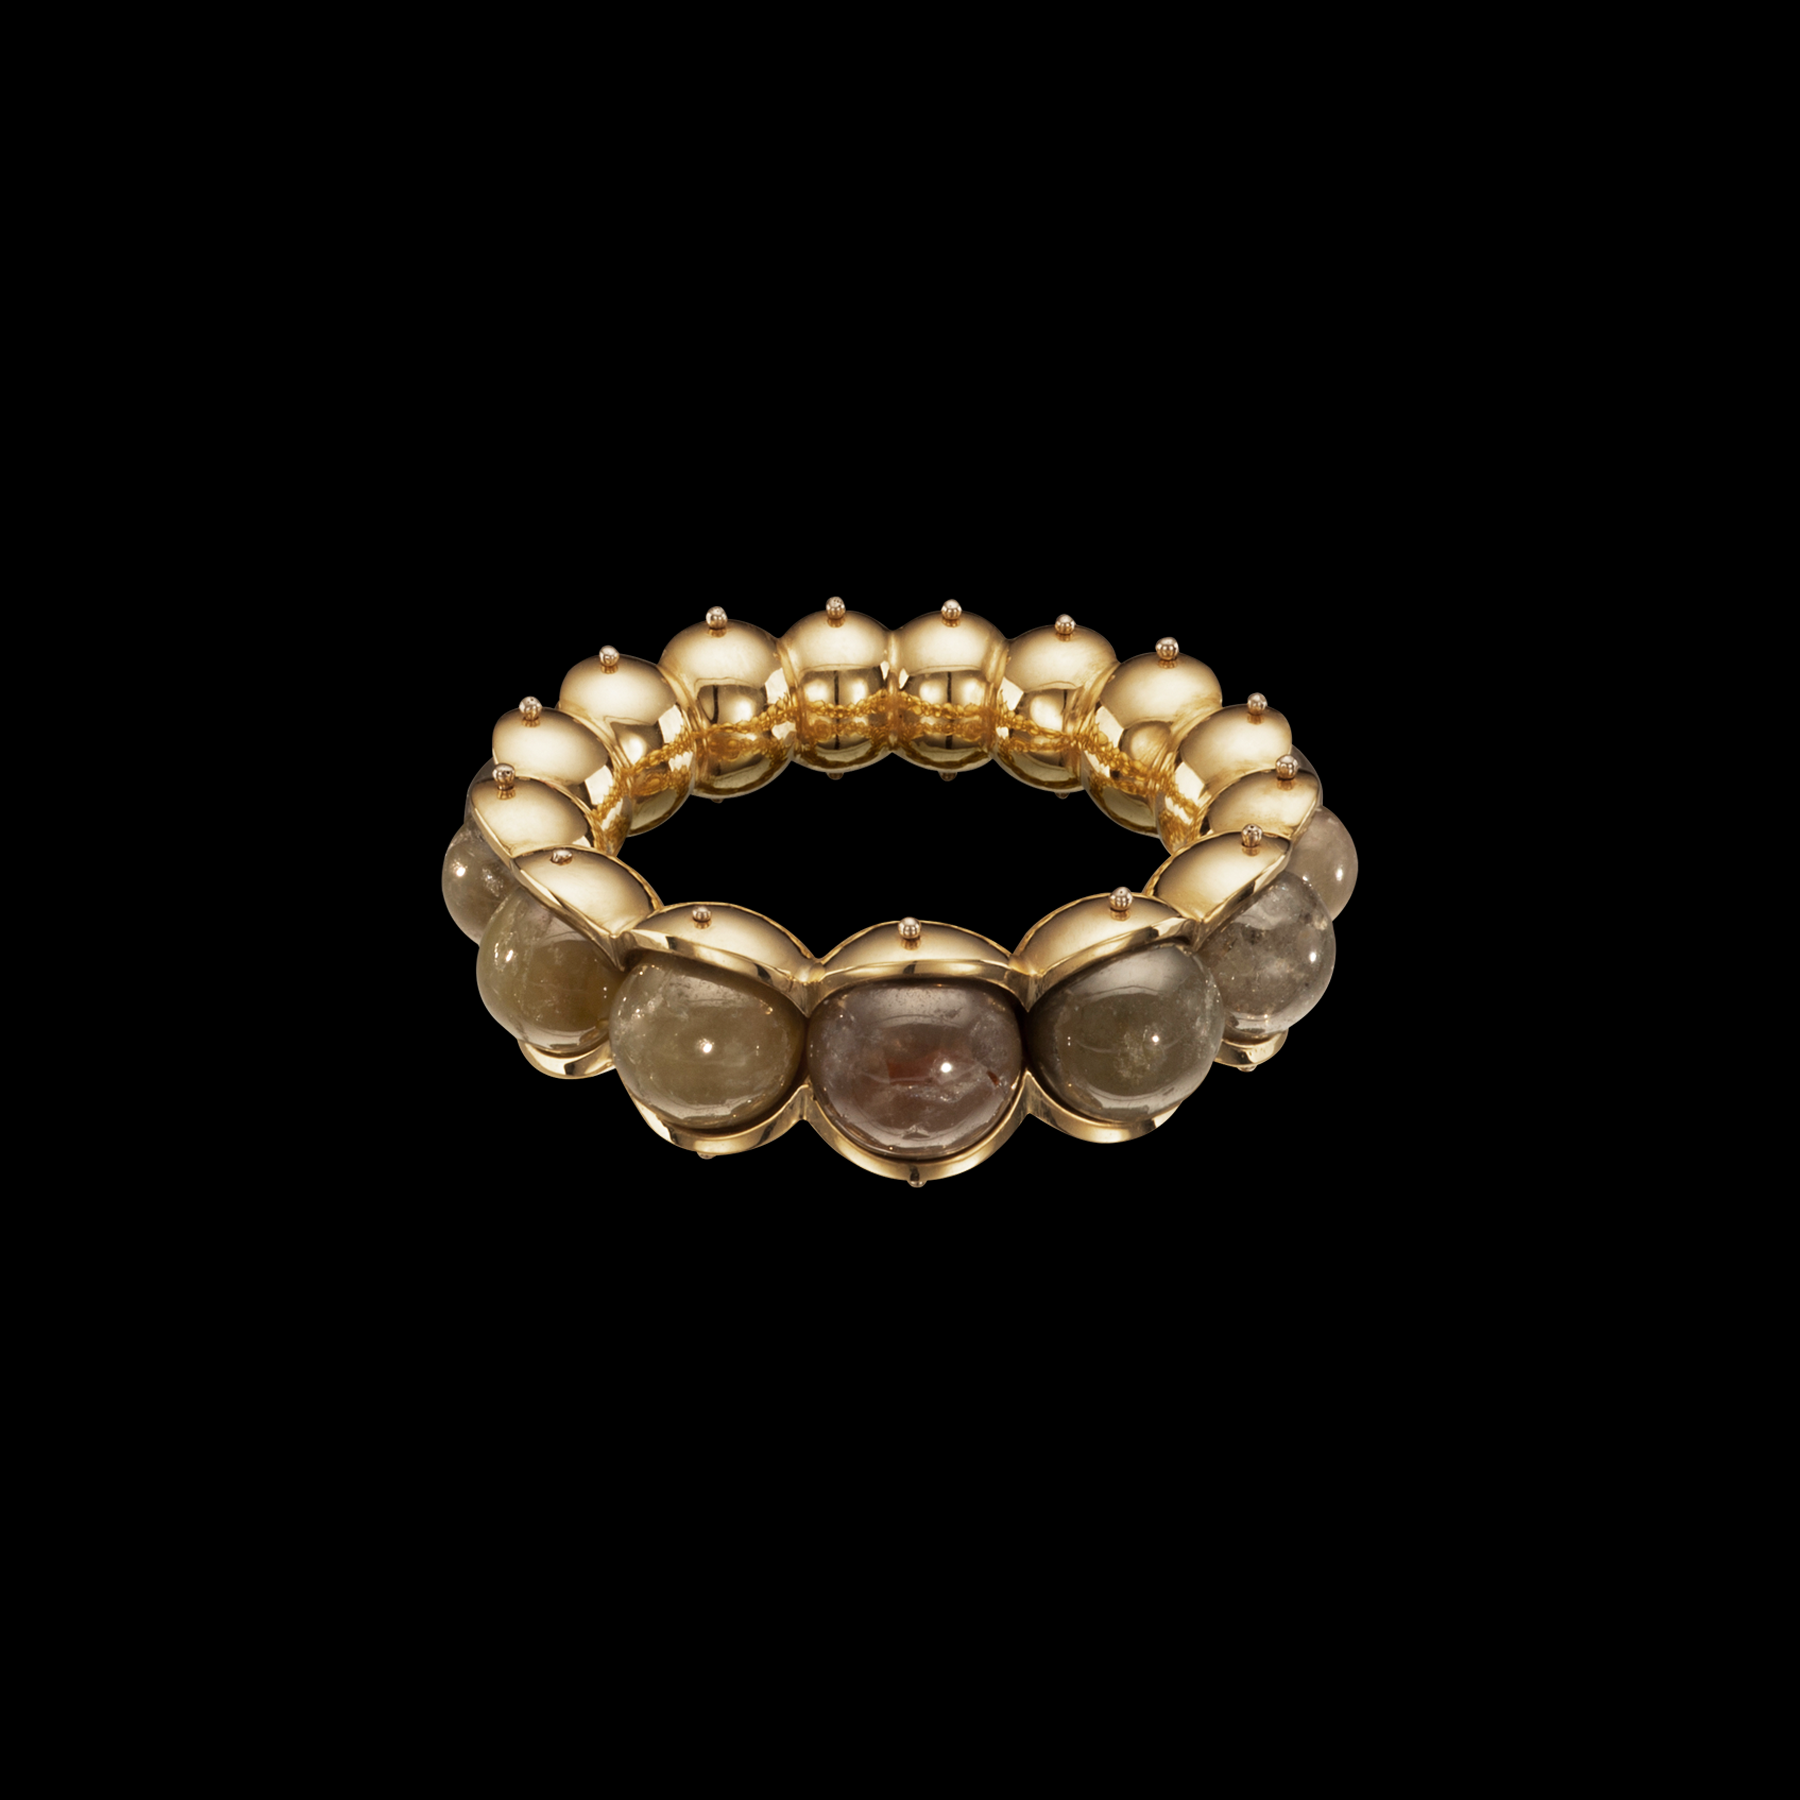 The Petrichor ring by designer Solange Azagury-Partridge - 18k Yellow Gold and Diamond Beads - front view 0